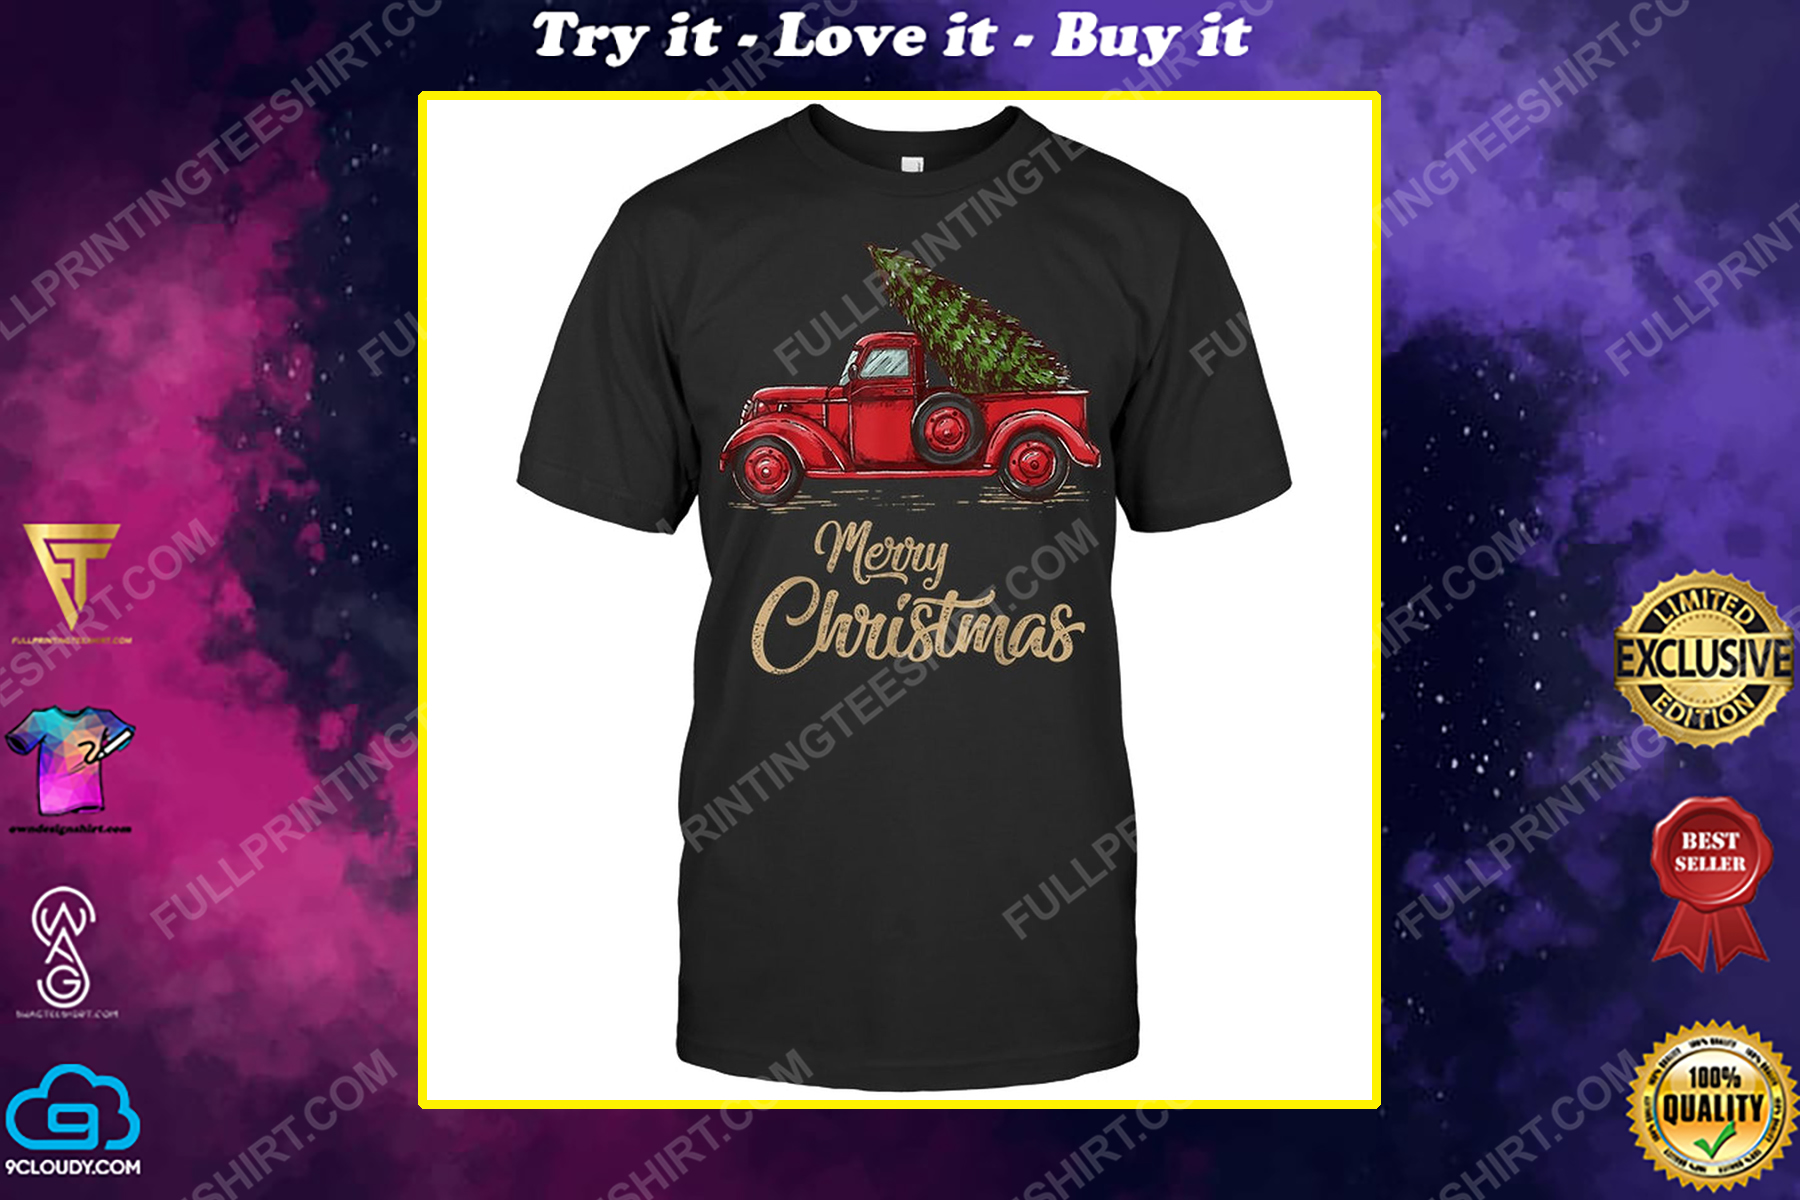 Vintage red truck with merry christmas tree shirt